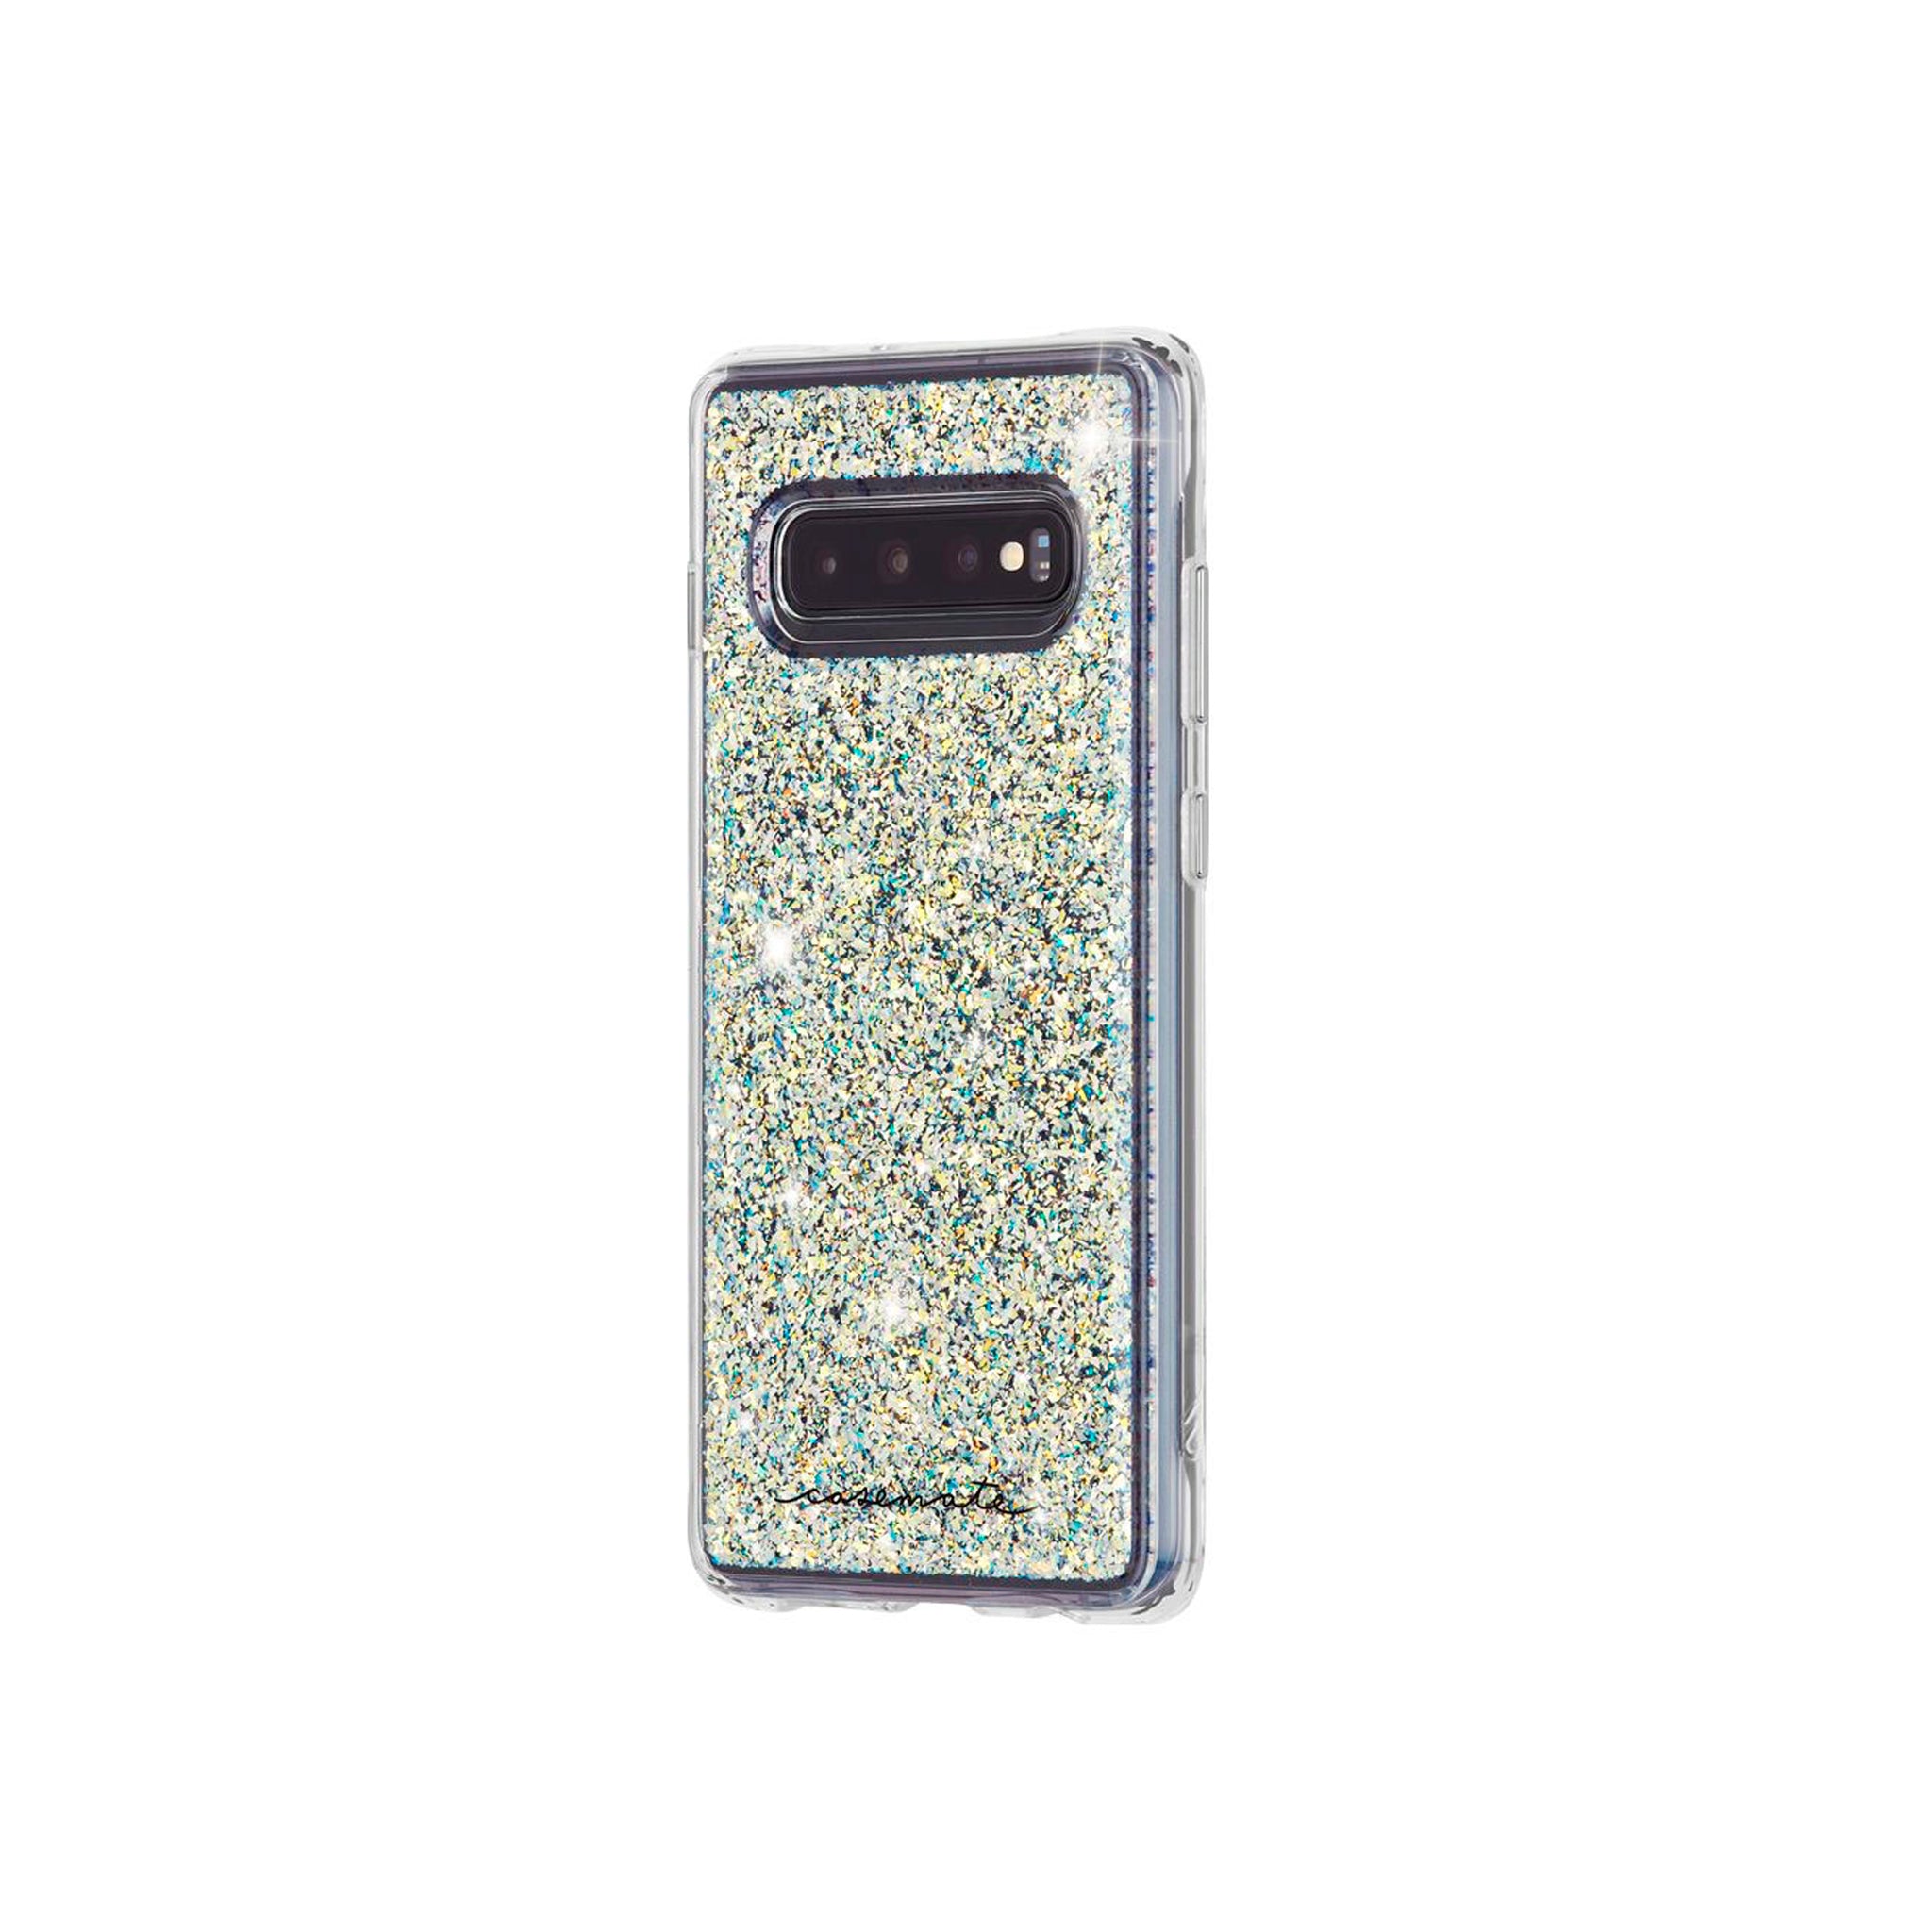 Case-mate - Twinkle Case For Samsung Galaxy S10 Plus - Stardust